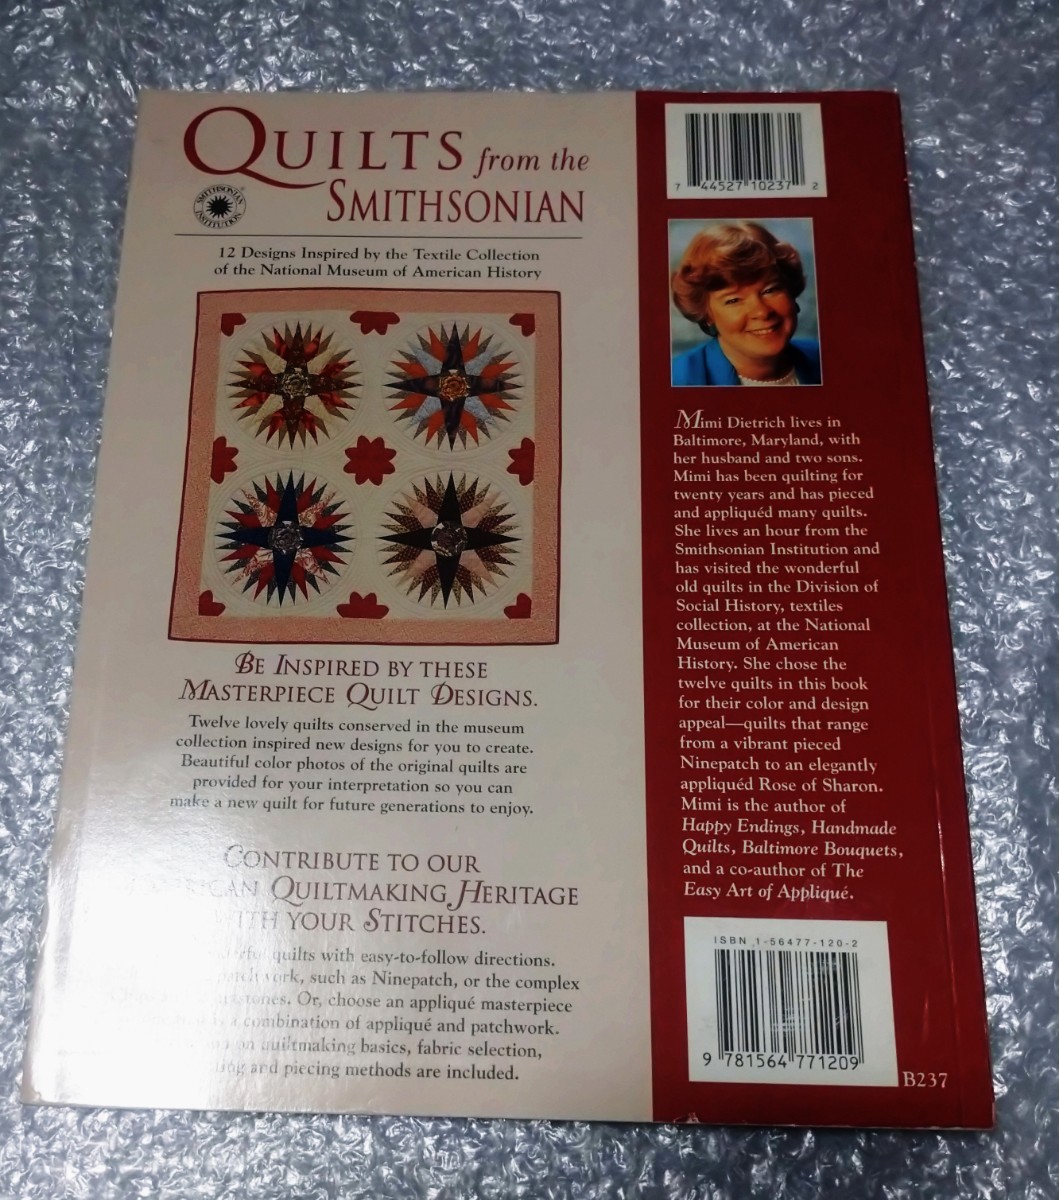 QUILTS from the SMITHSONIAN 洋書 キルト